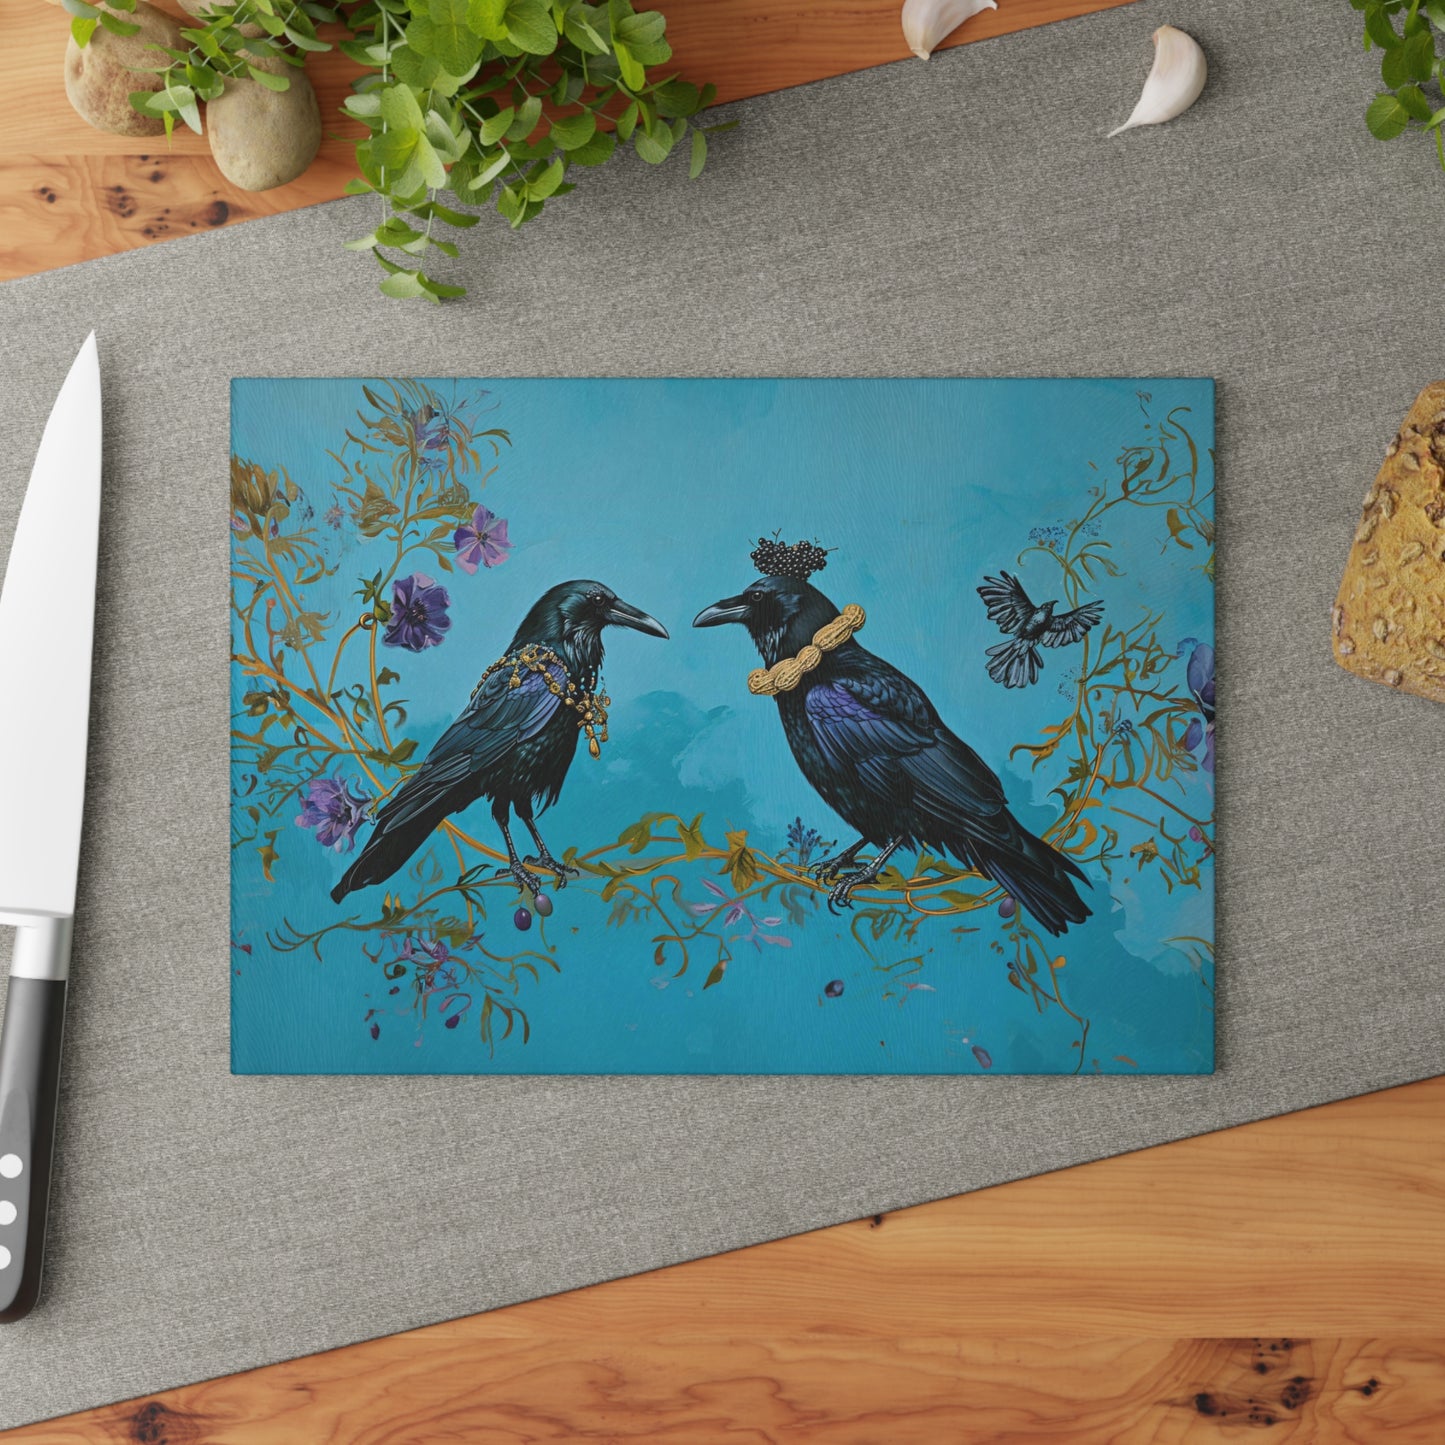 Crow and Raven Wearing Peanut Necklaces and a Blackberry Hat Glass Cutting Board